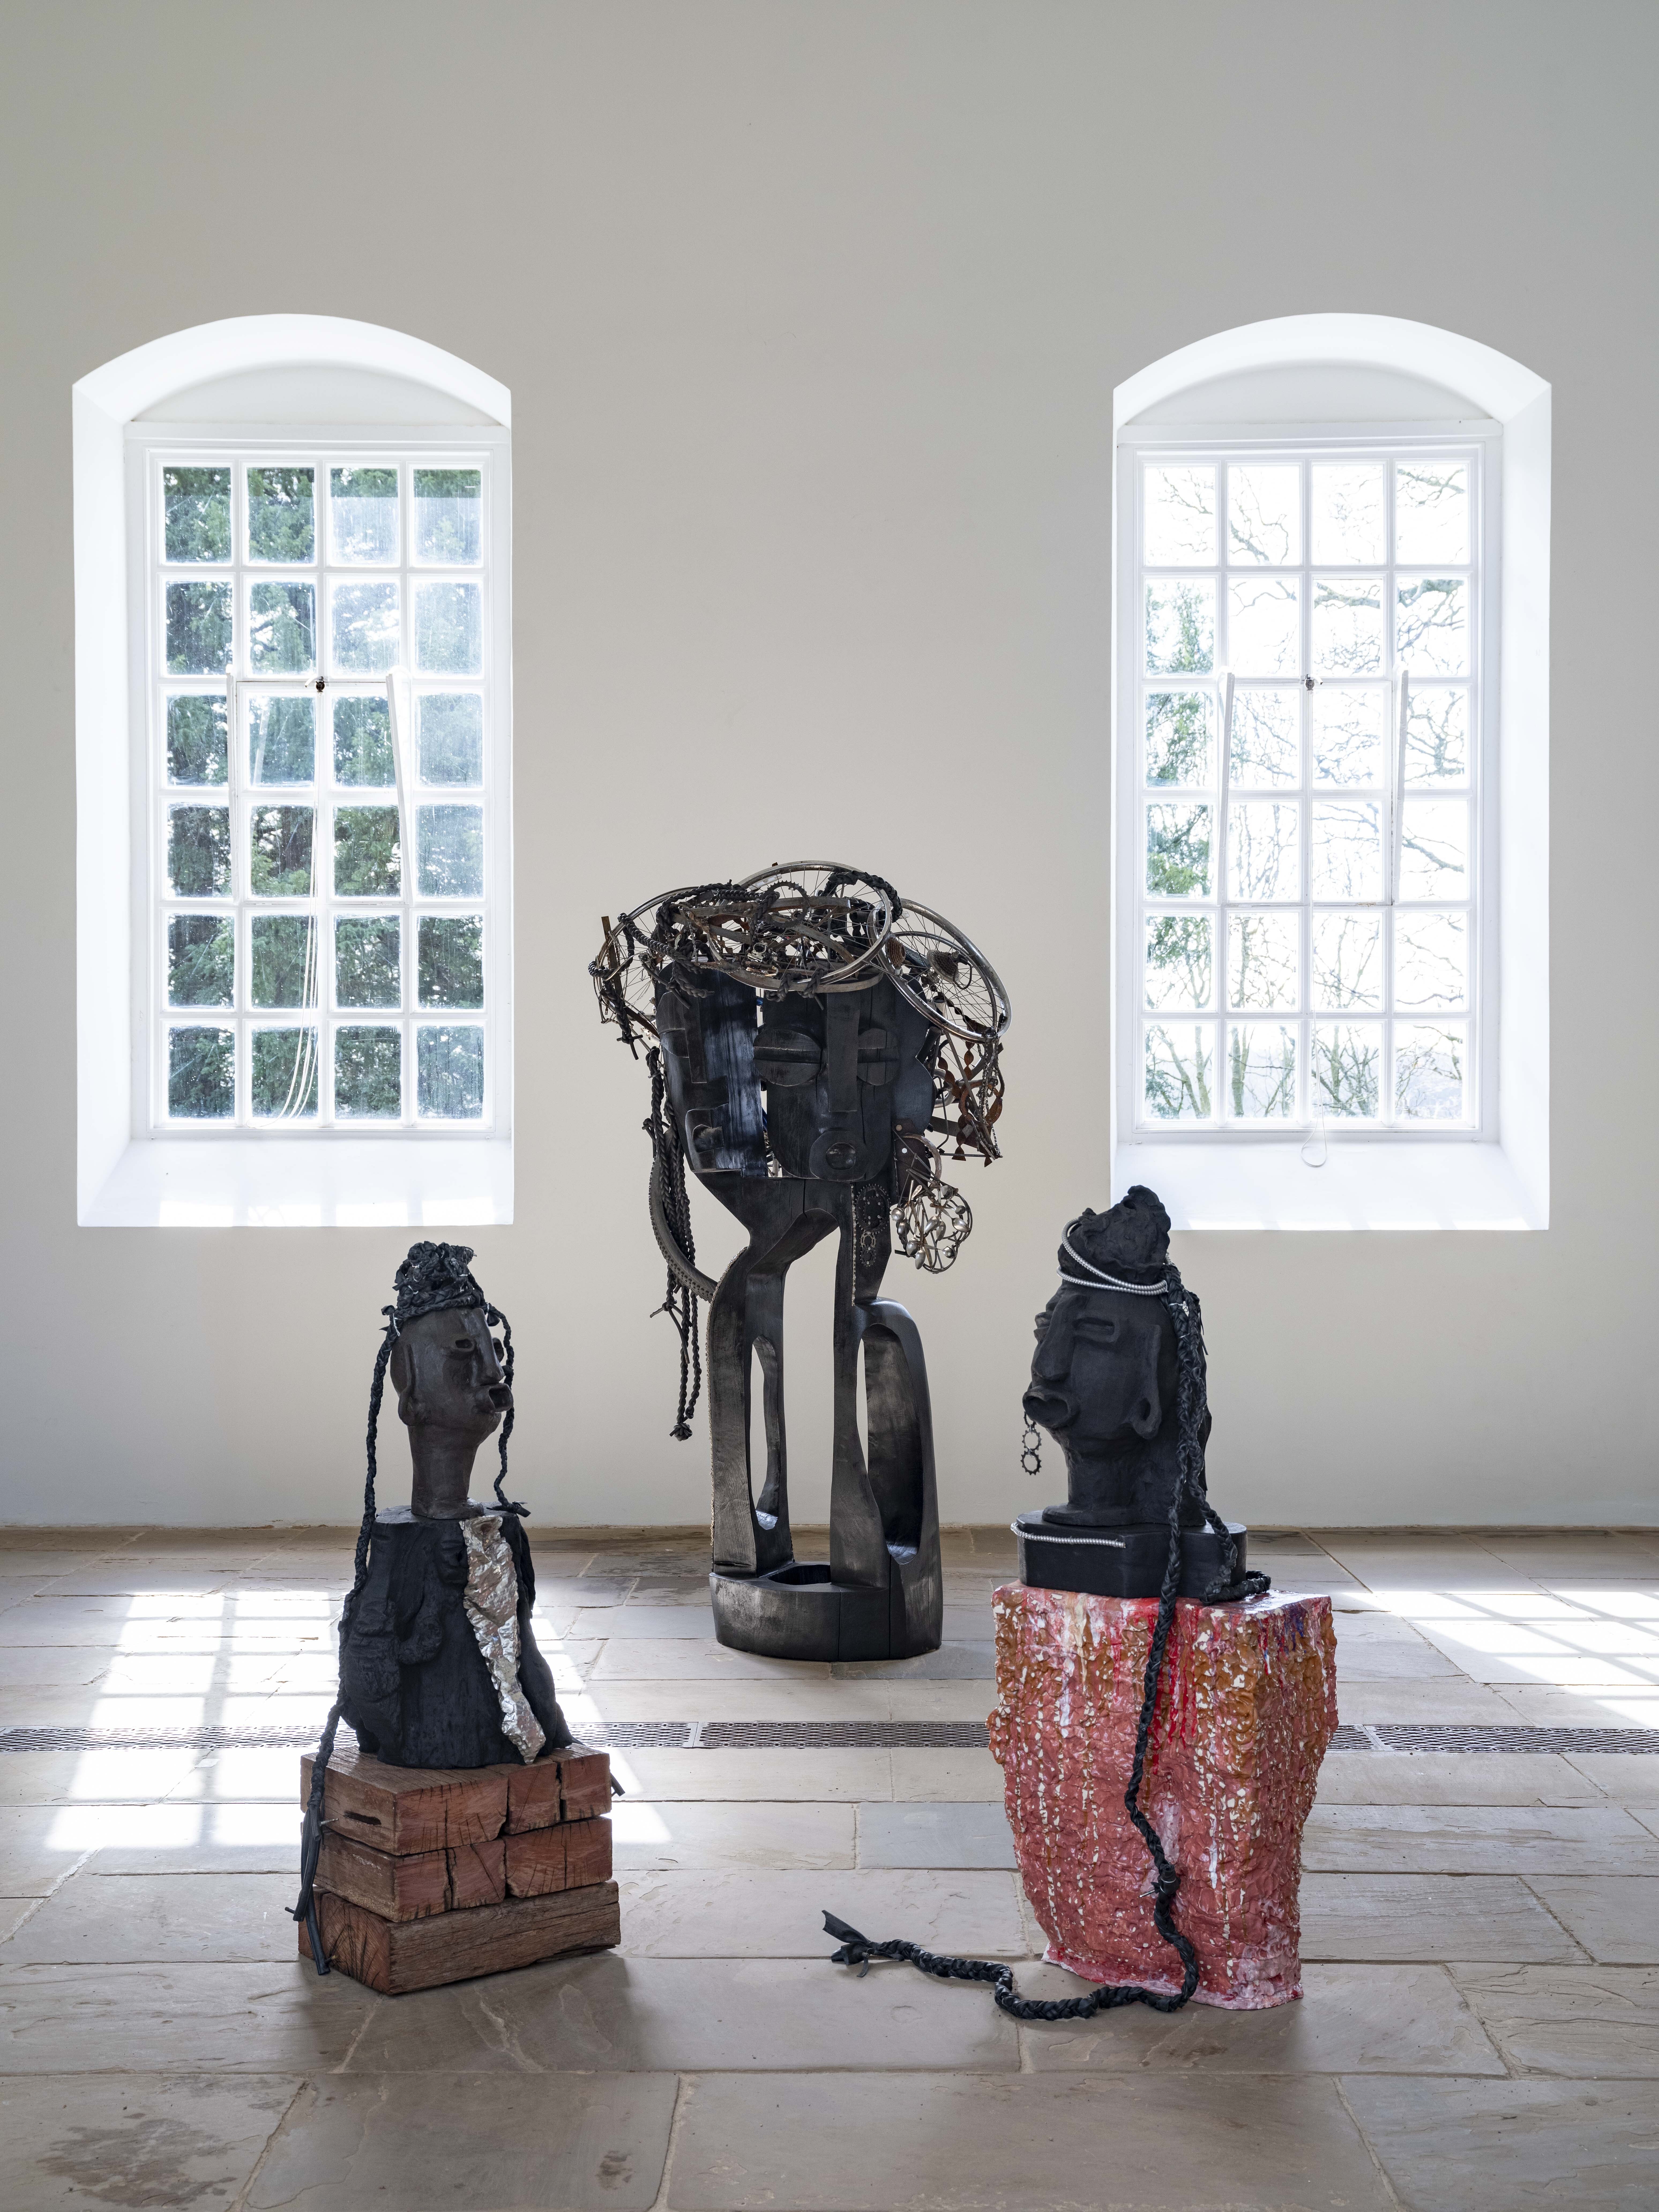 Three large sculptures indoors with two large windows in the background